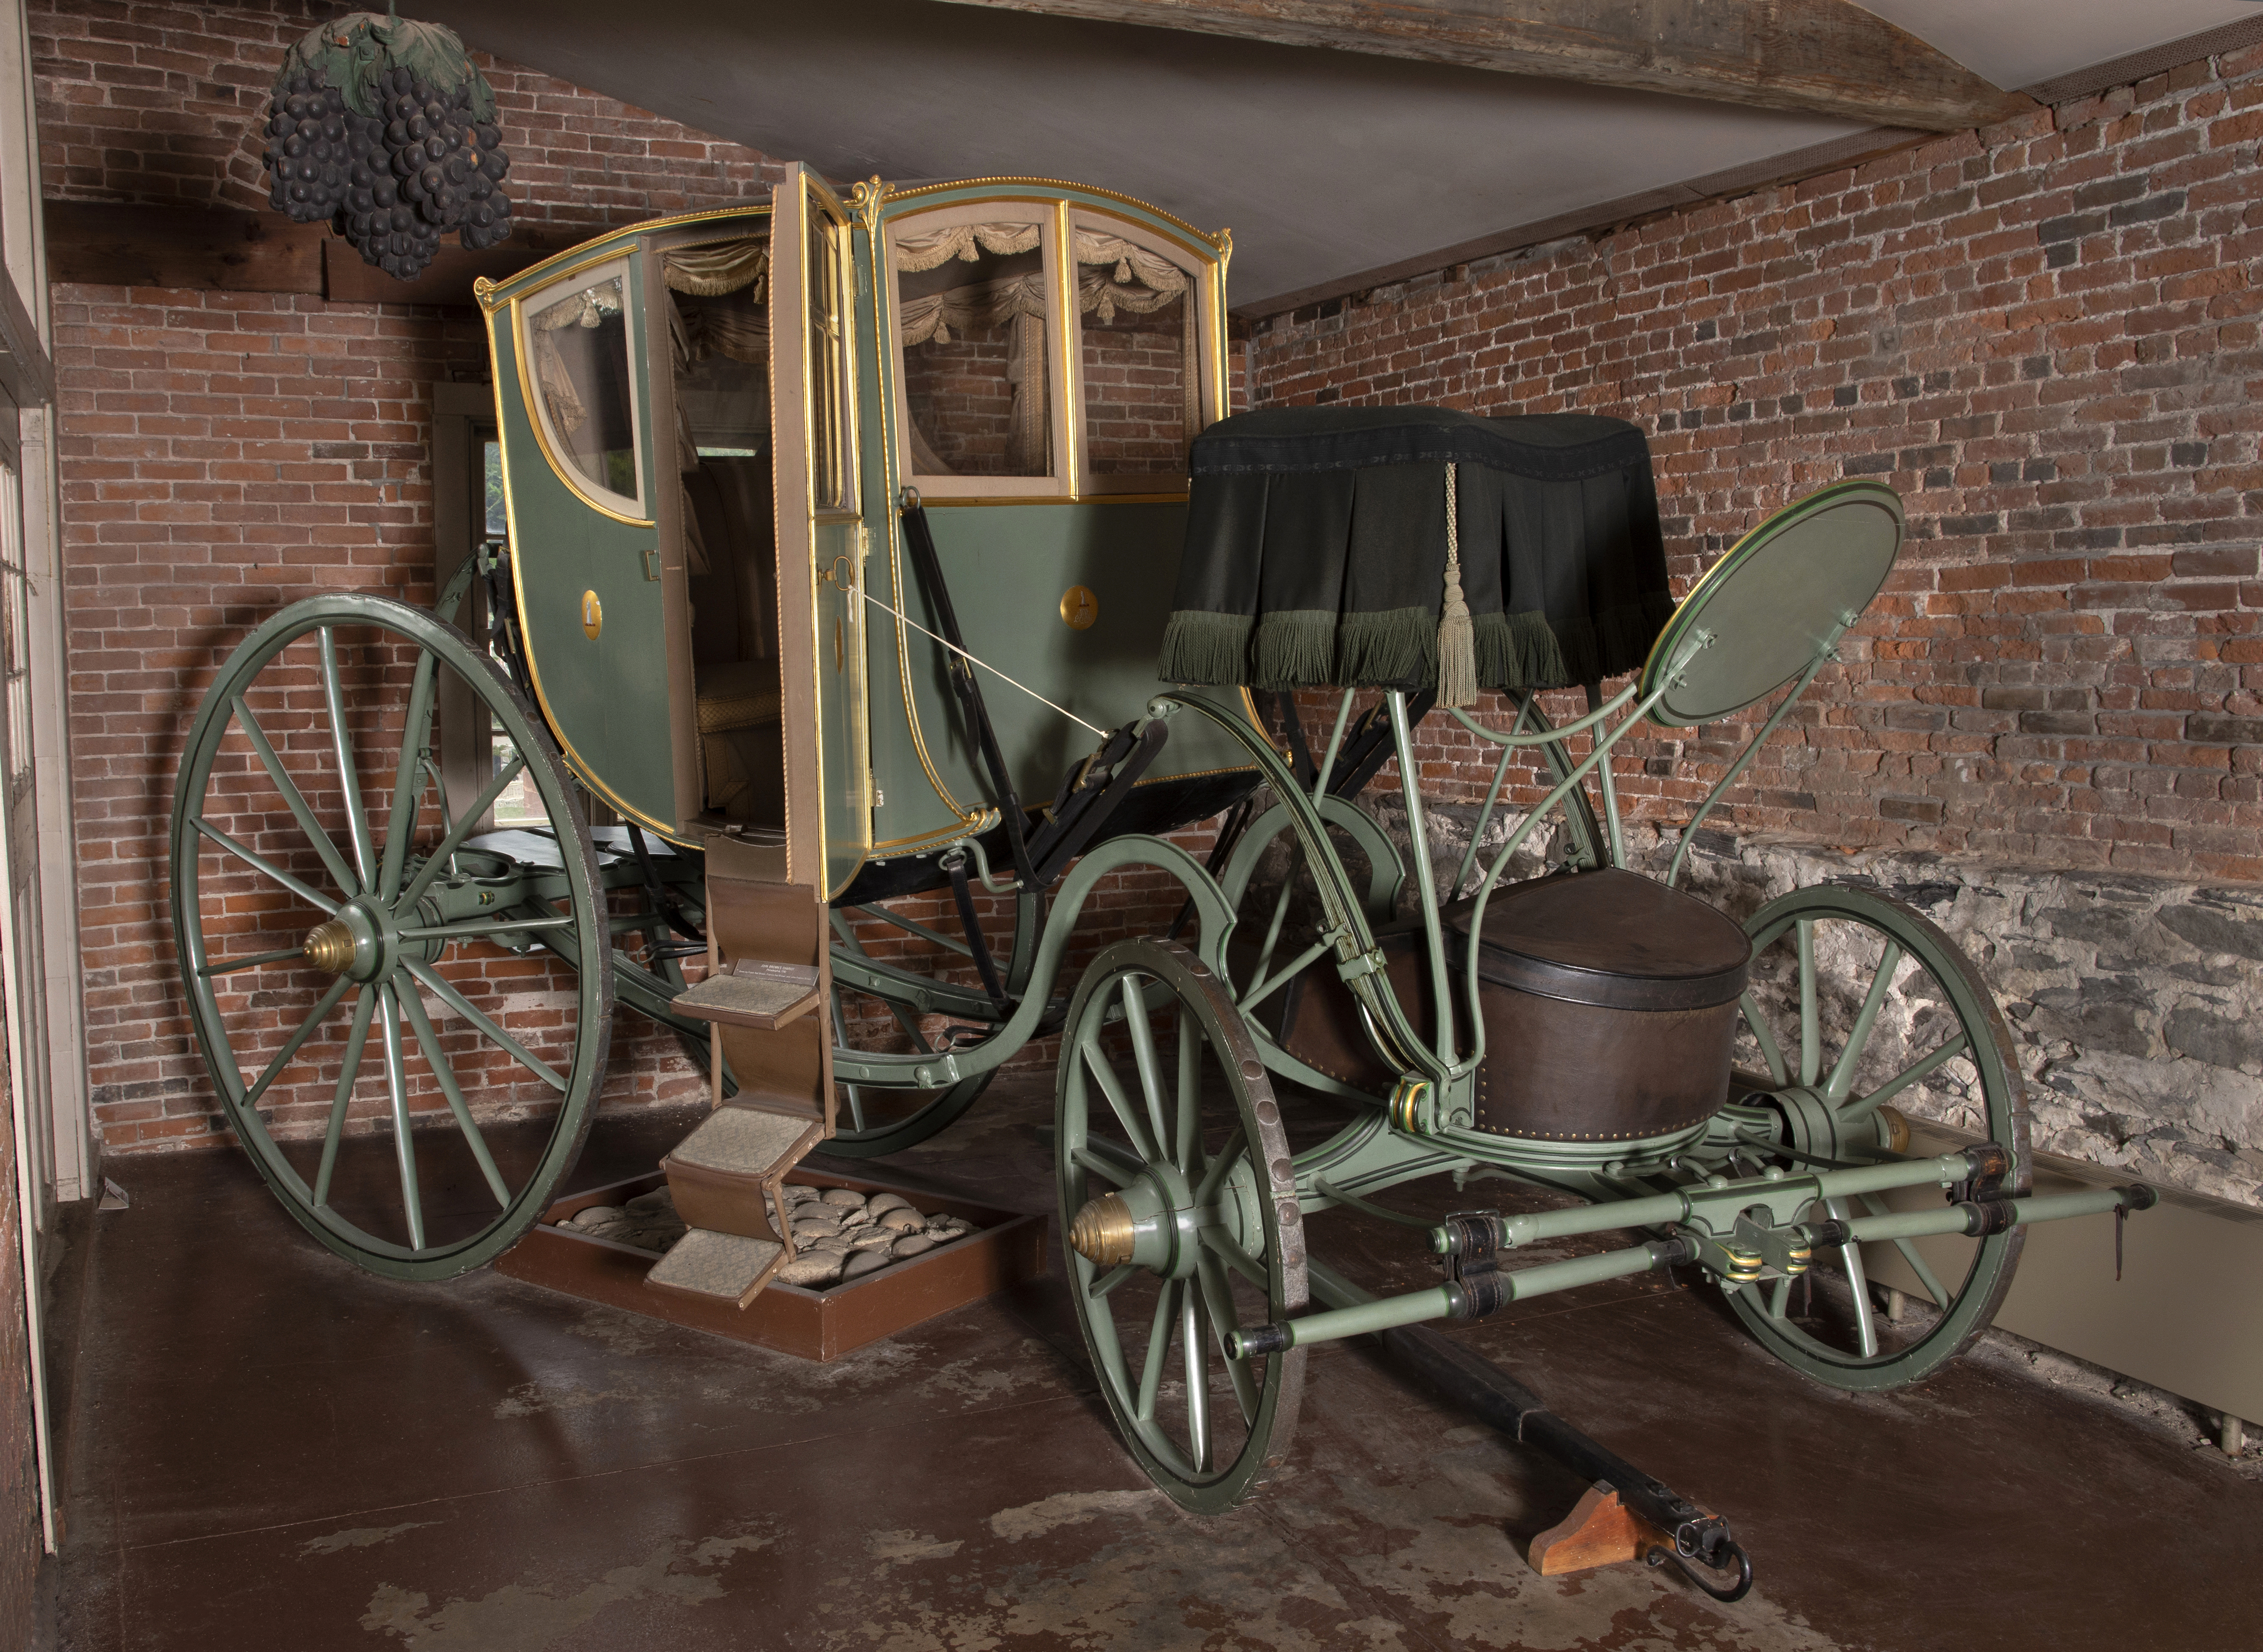 John Brown’s carriage in Providence, similar to George Washington’s.